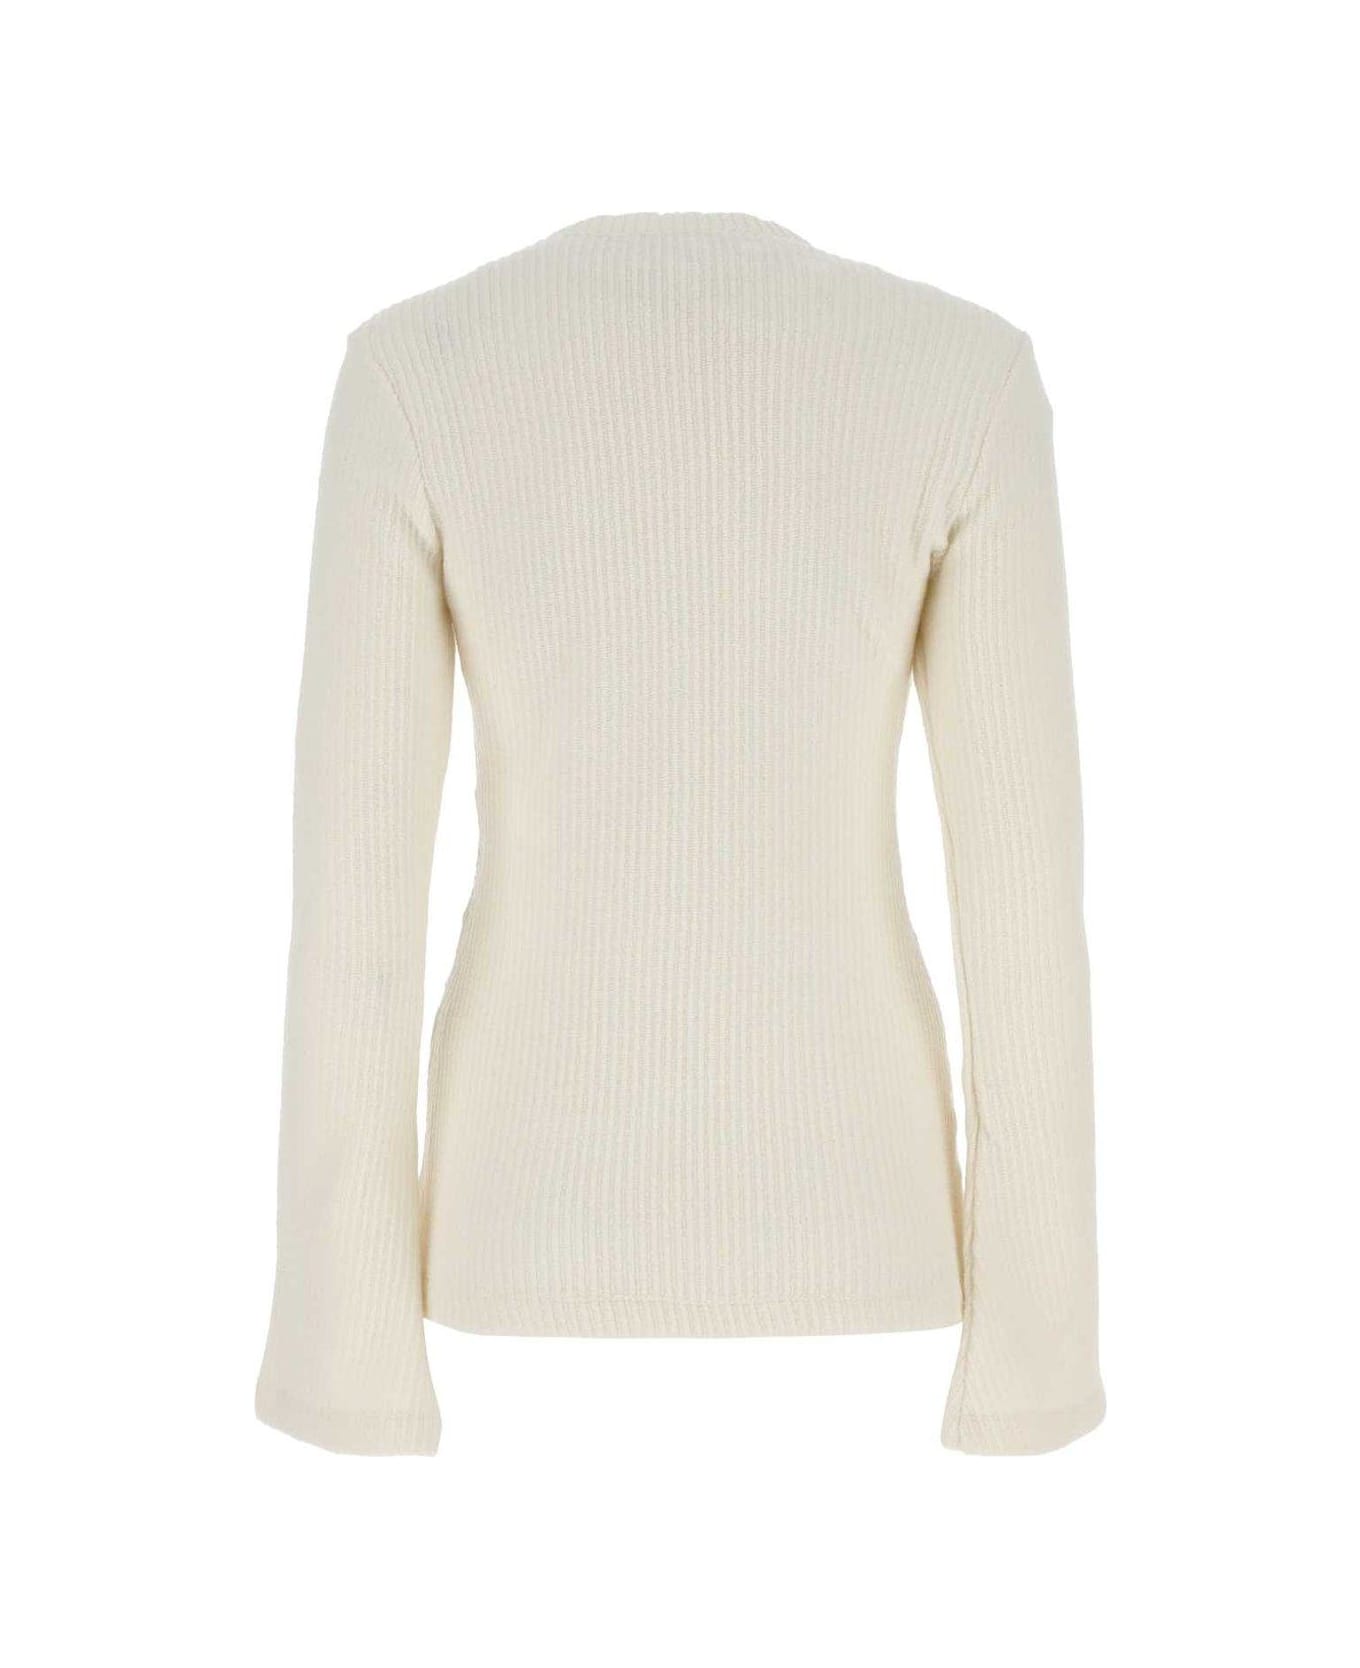 Chloé Flare Sleeved Knit Top - White